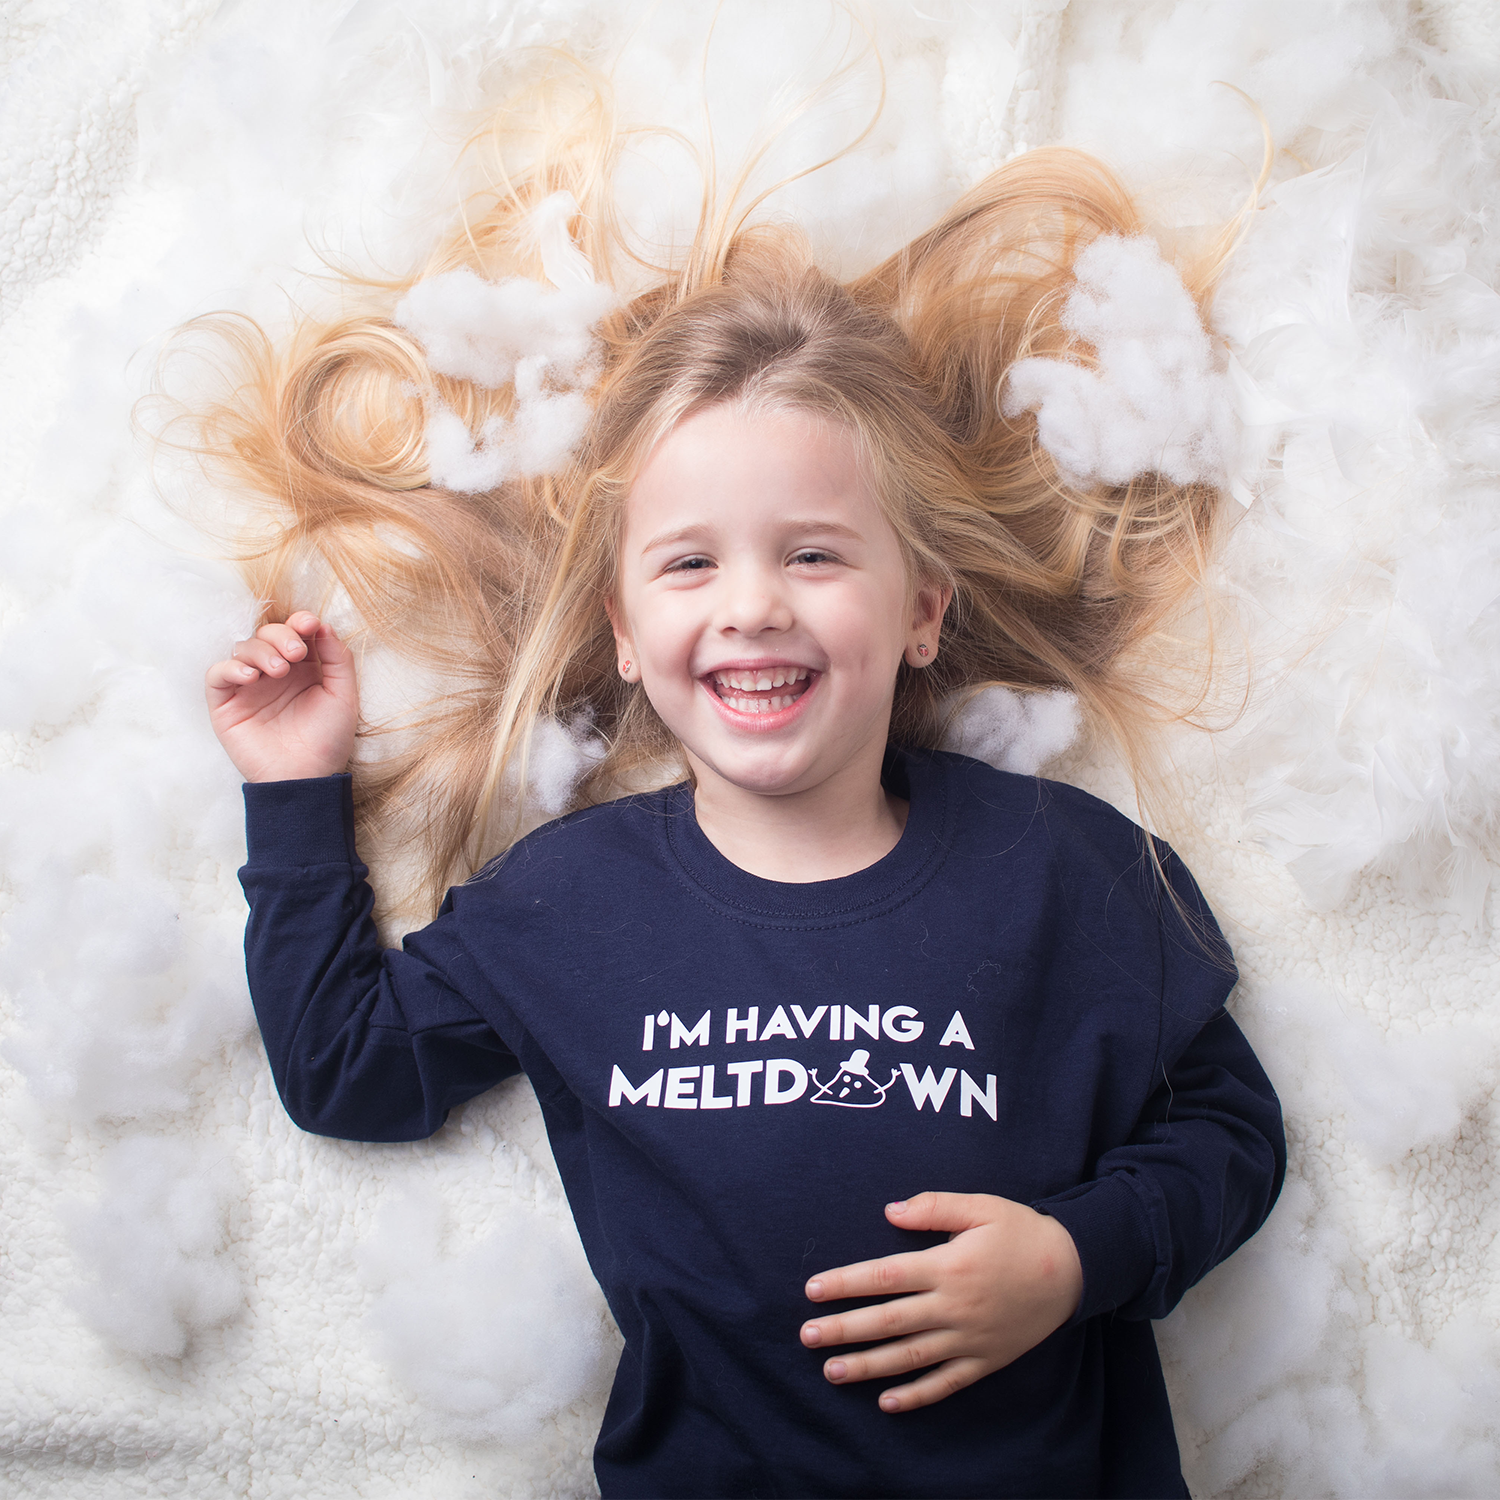 Laughing blonde girl laying on snow with hair spread out, wearing navy shirt with 'I'm having a meltdown' print by KMLeon.